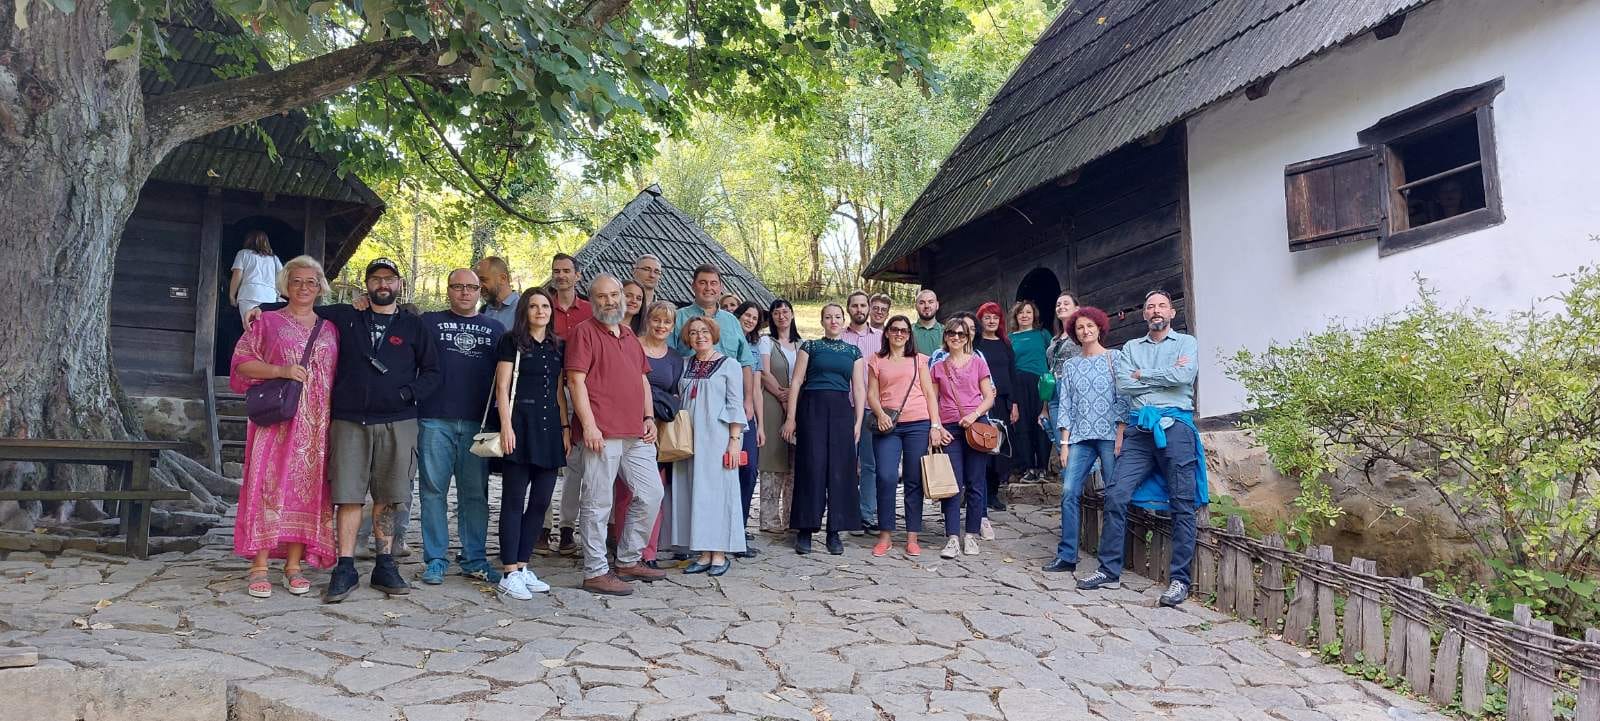 Associates of the SASA Institute of Ethnography participated in a conference in Tršić